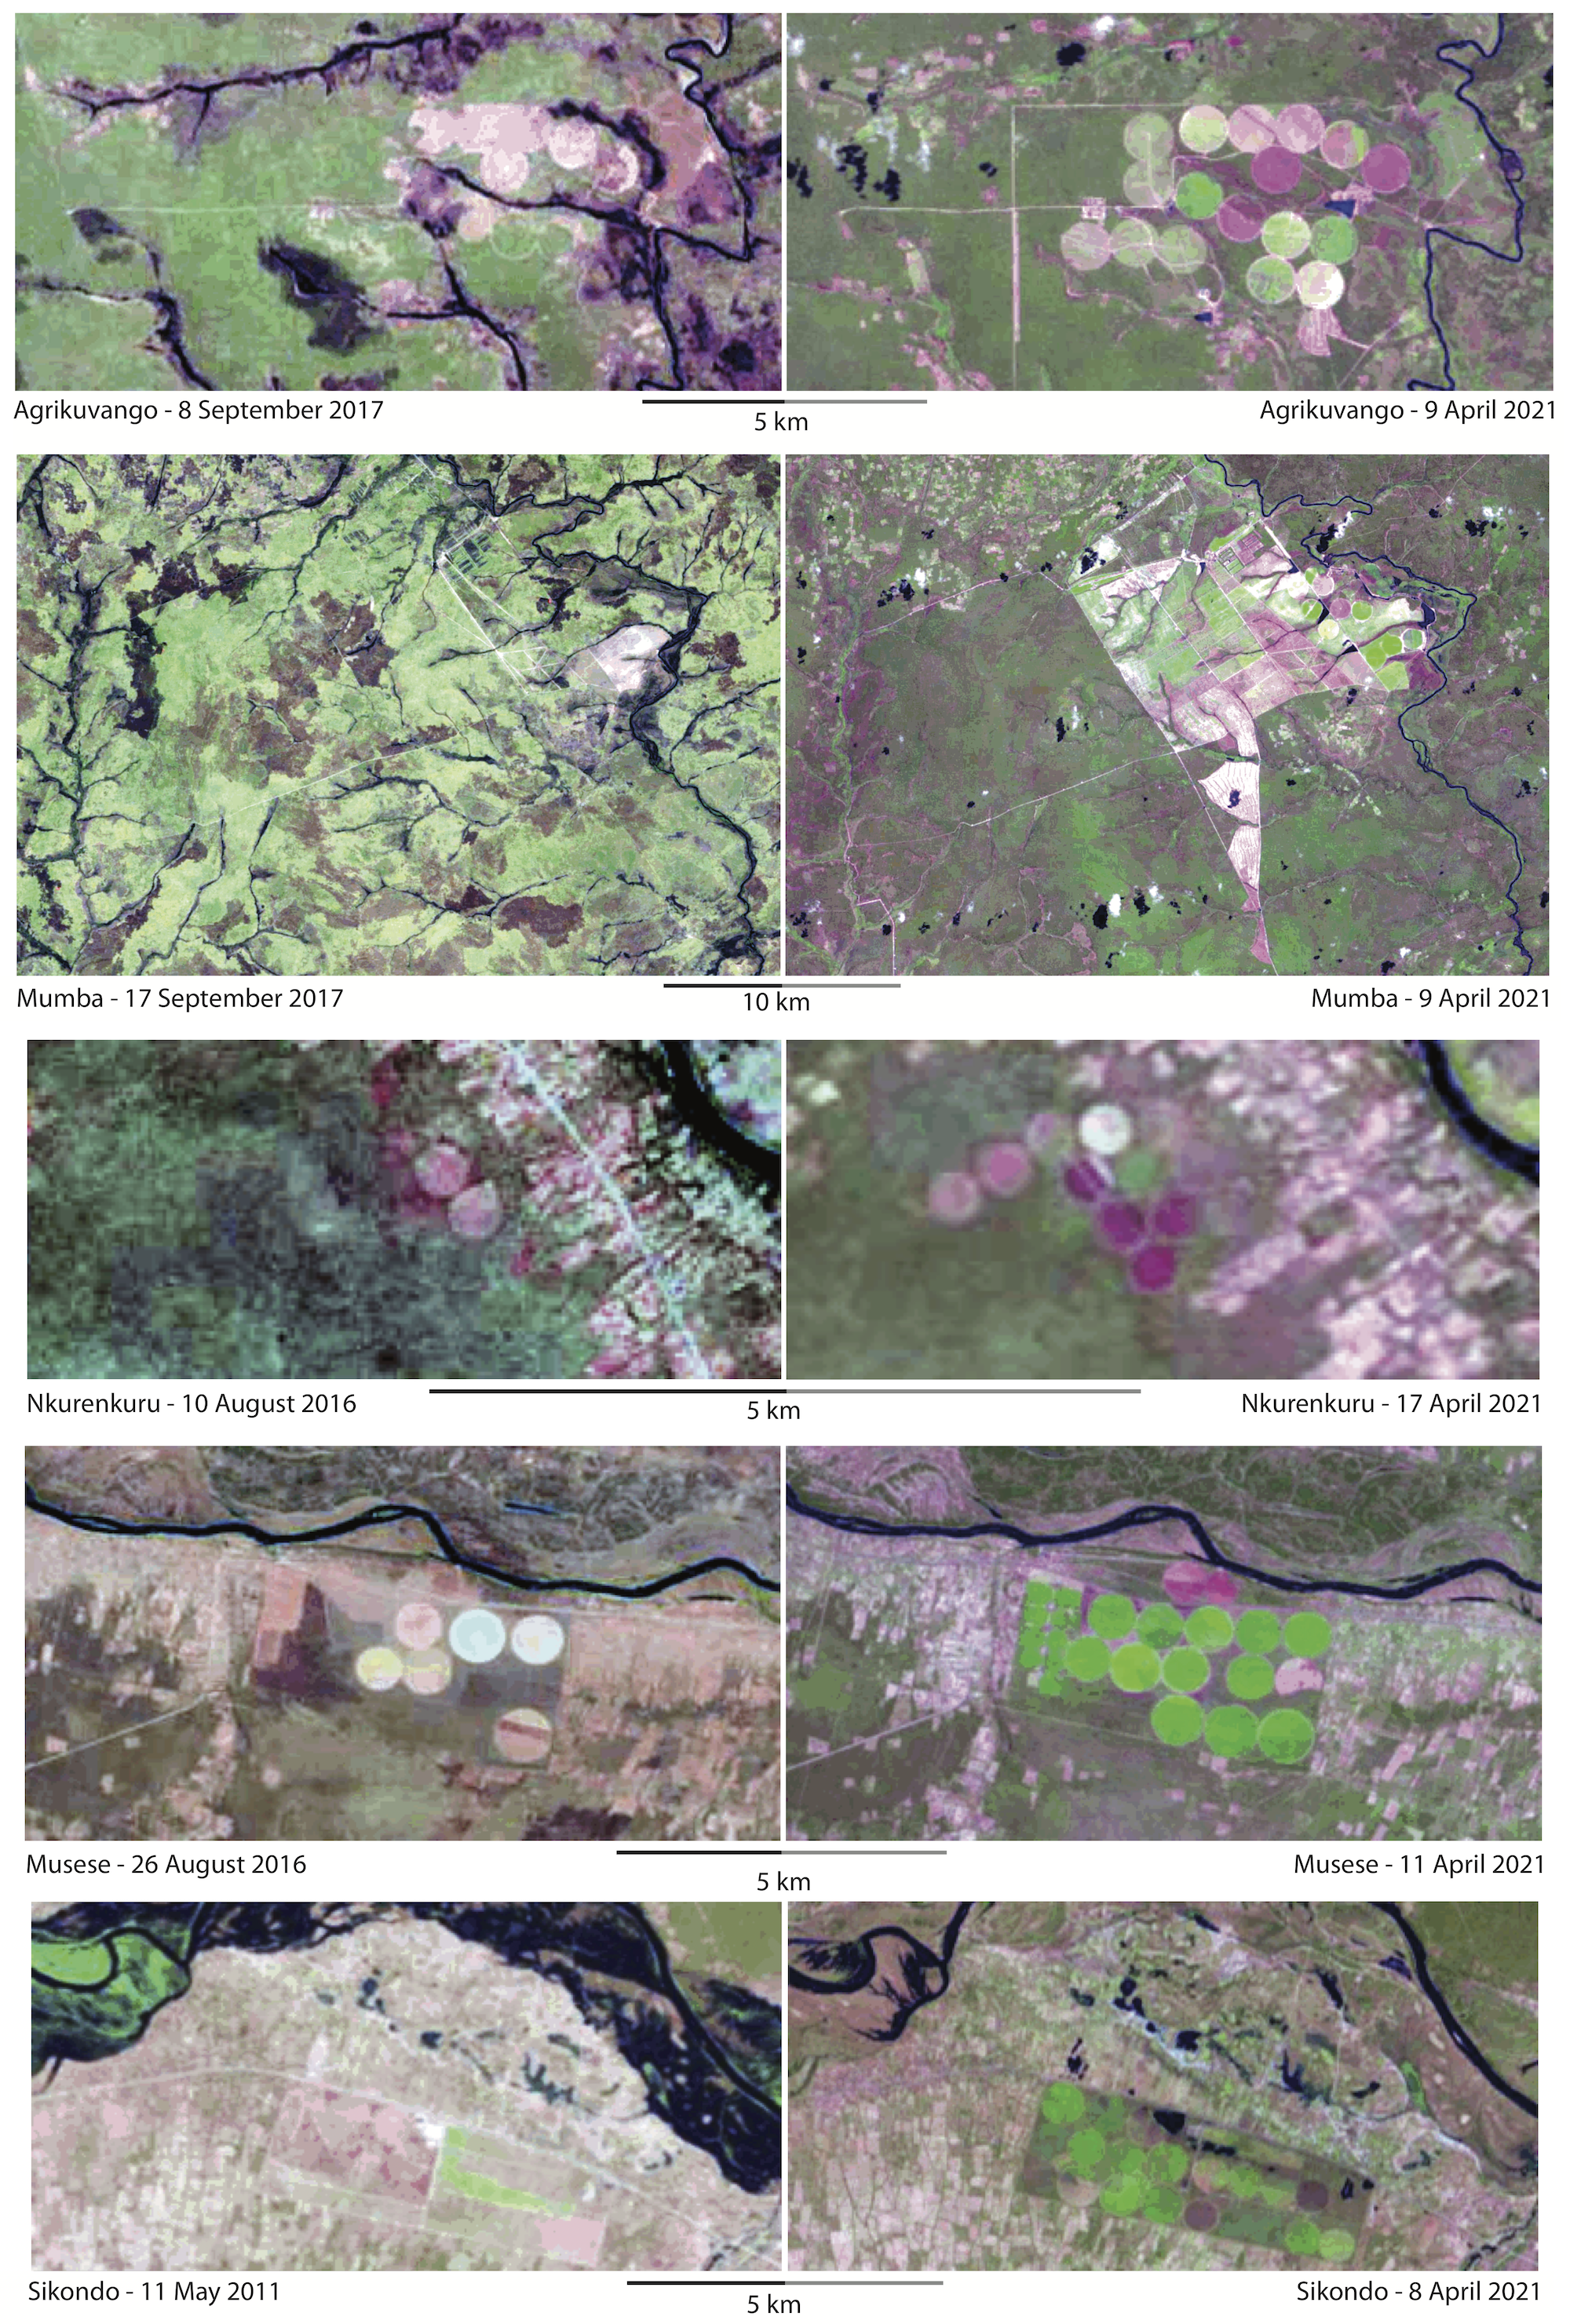 Five pairs of images showing changes over time. The later images show much more intensive irrigation systems